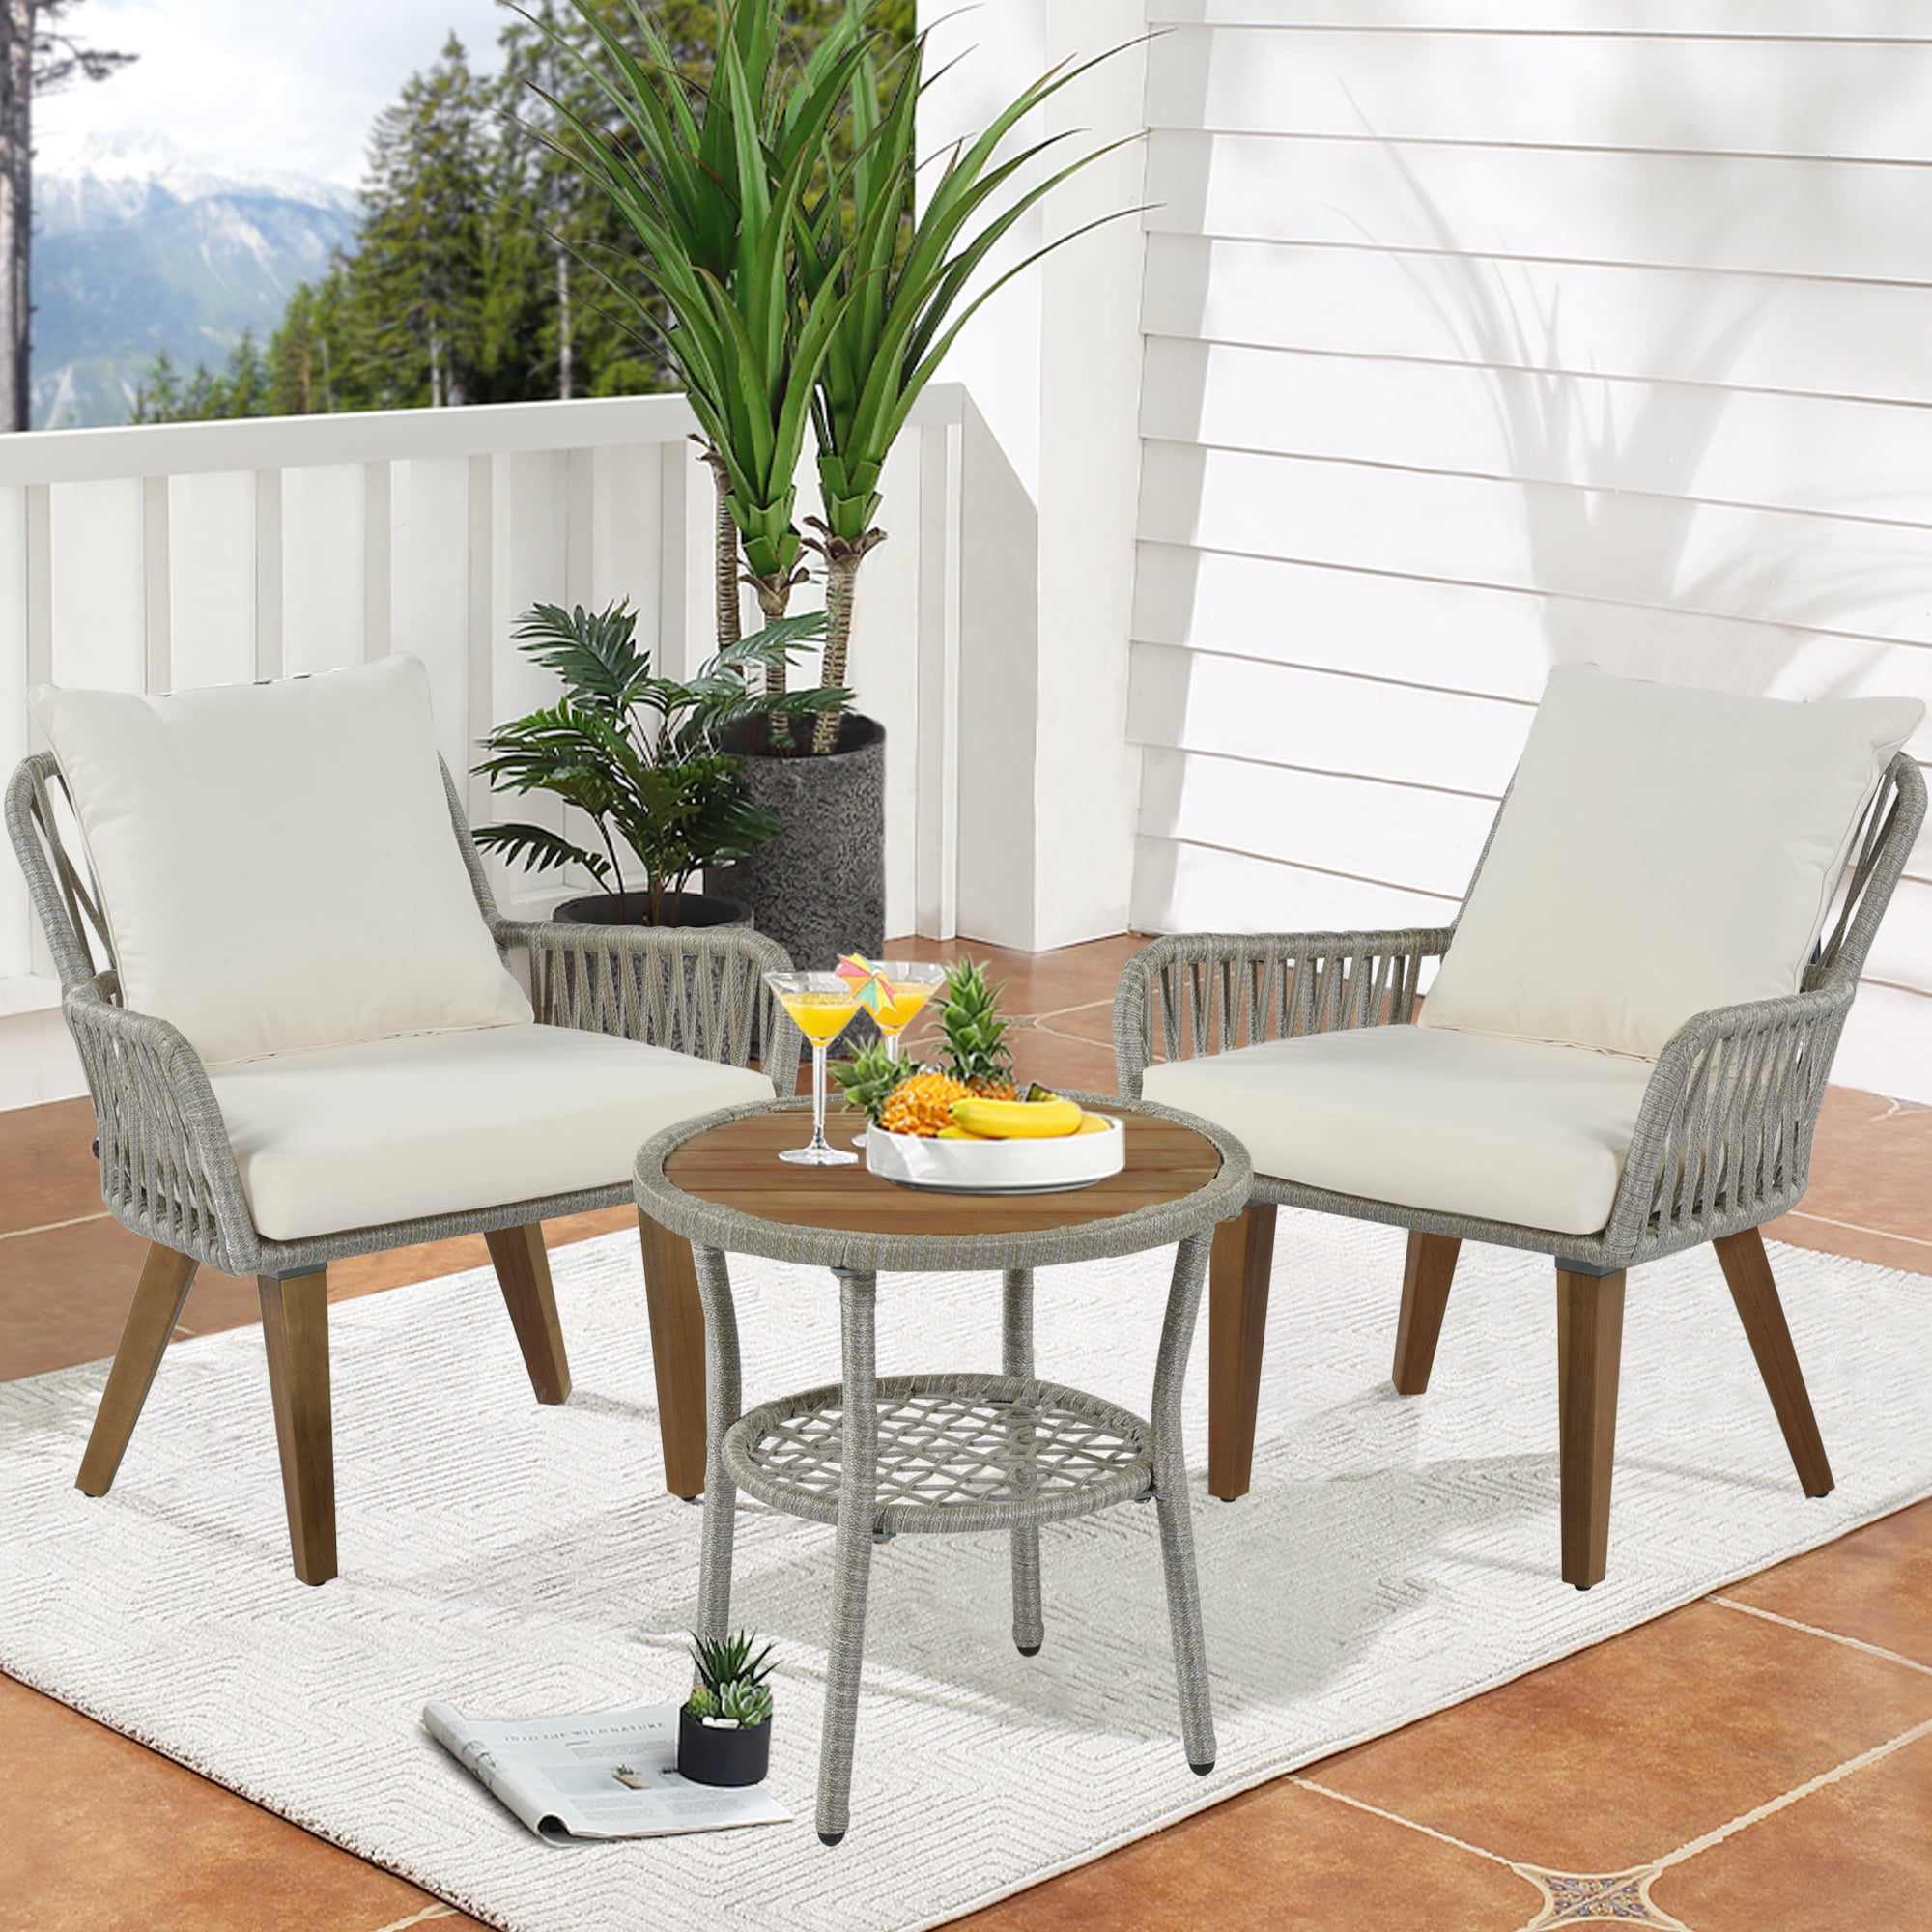 3 Pcs Patio Bistro Furniture Set, Woven-Rope Bistro Set with Soft Cushion, 2 Chairs and 1 Wood Outdoor Bistro Tabletop, Outdoor Conversation Set for Patio Backyard Porches, T164